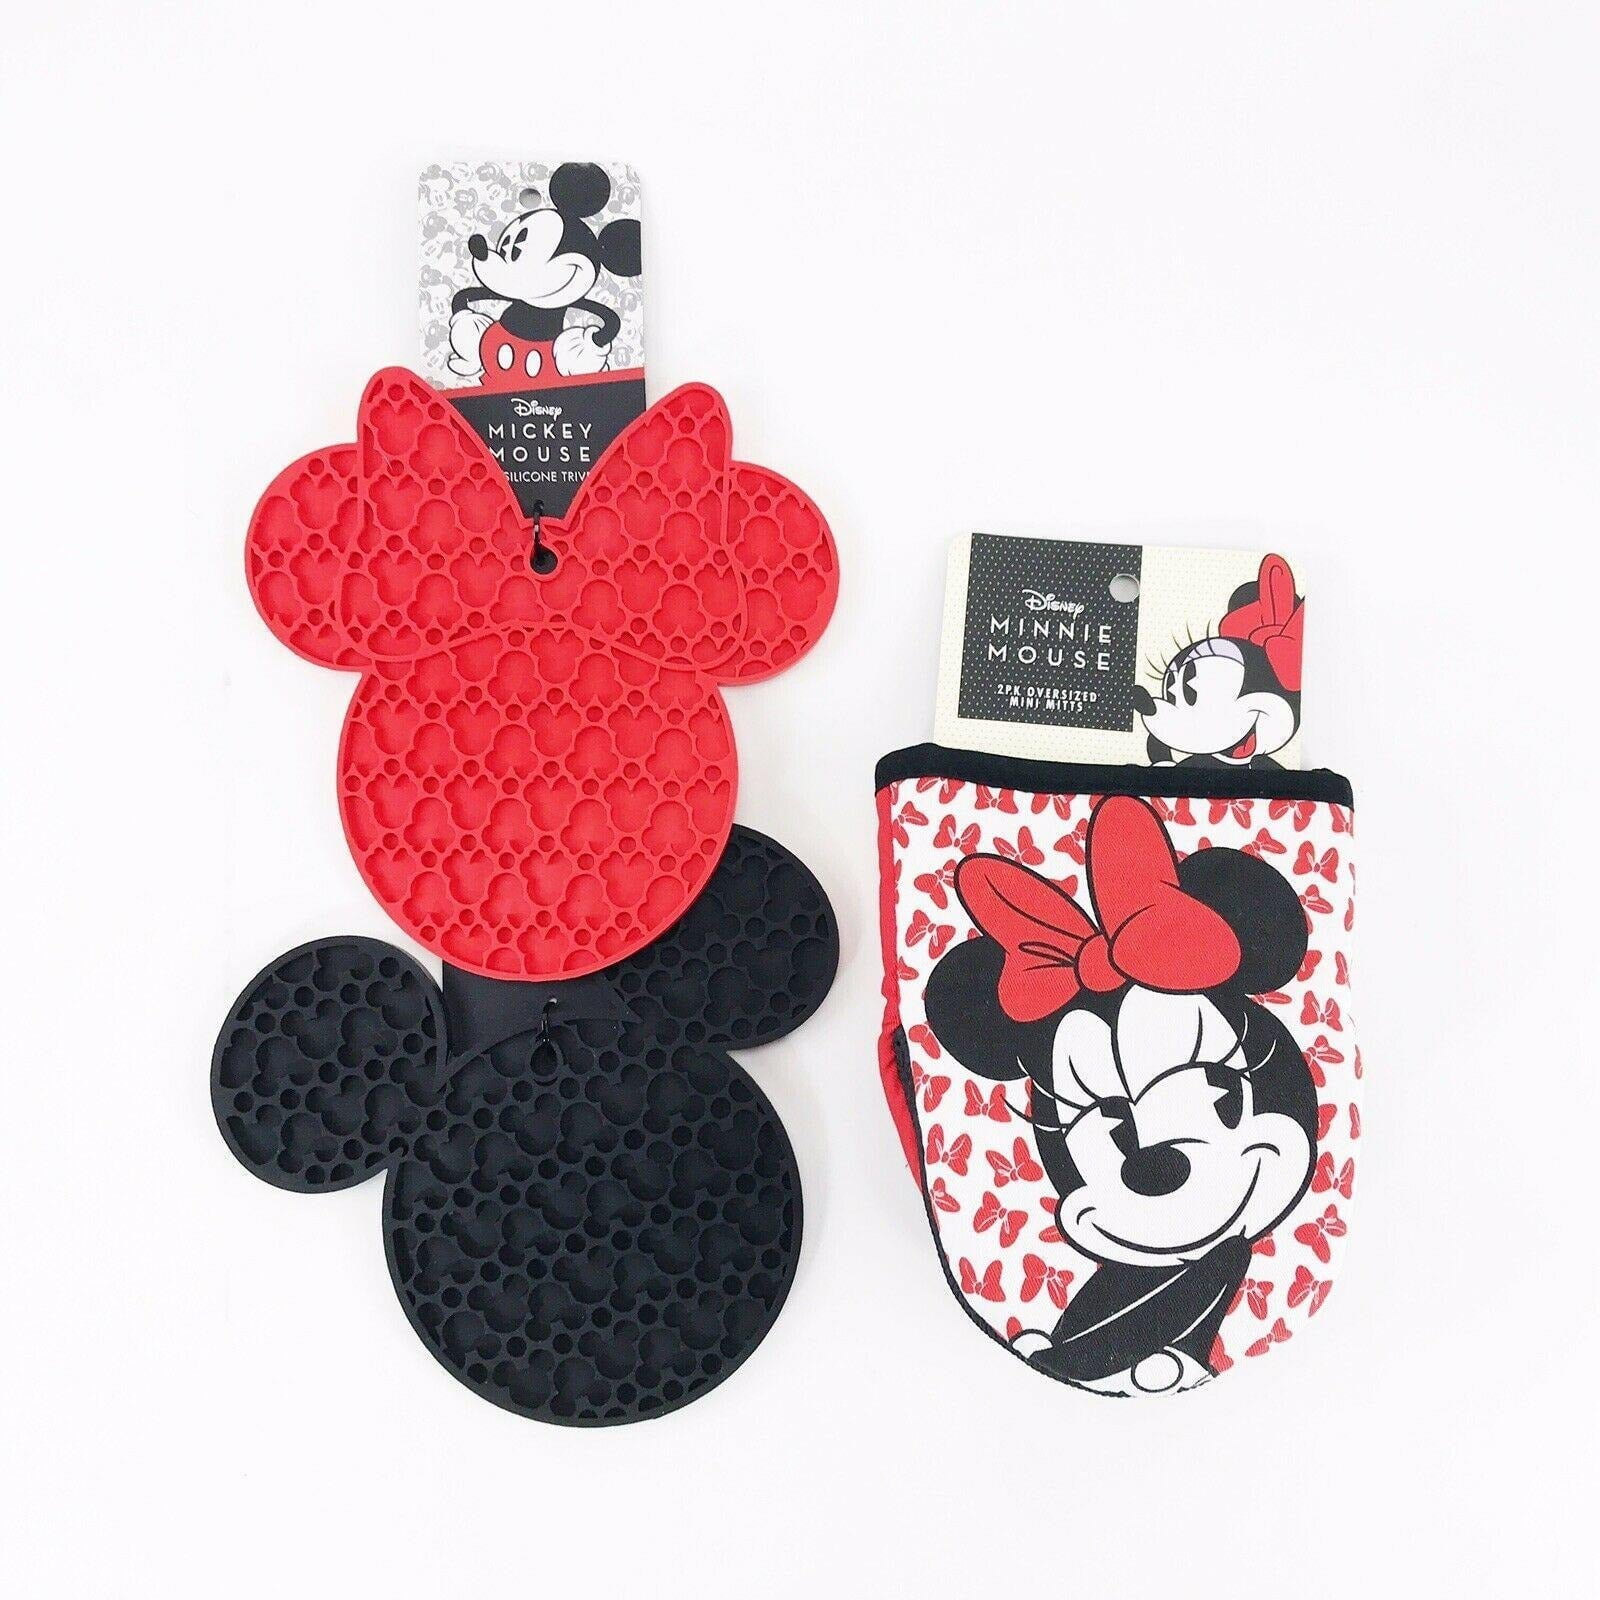 NEW Disney Mickey Mouse Kitchen SET Dish Cloth Hand Towels Silicone Trivet  Set